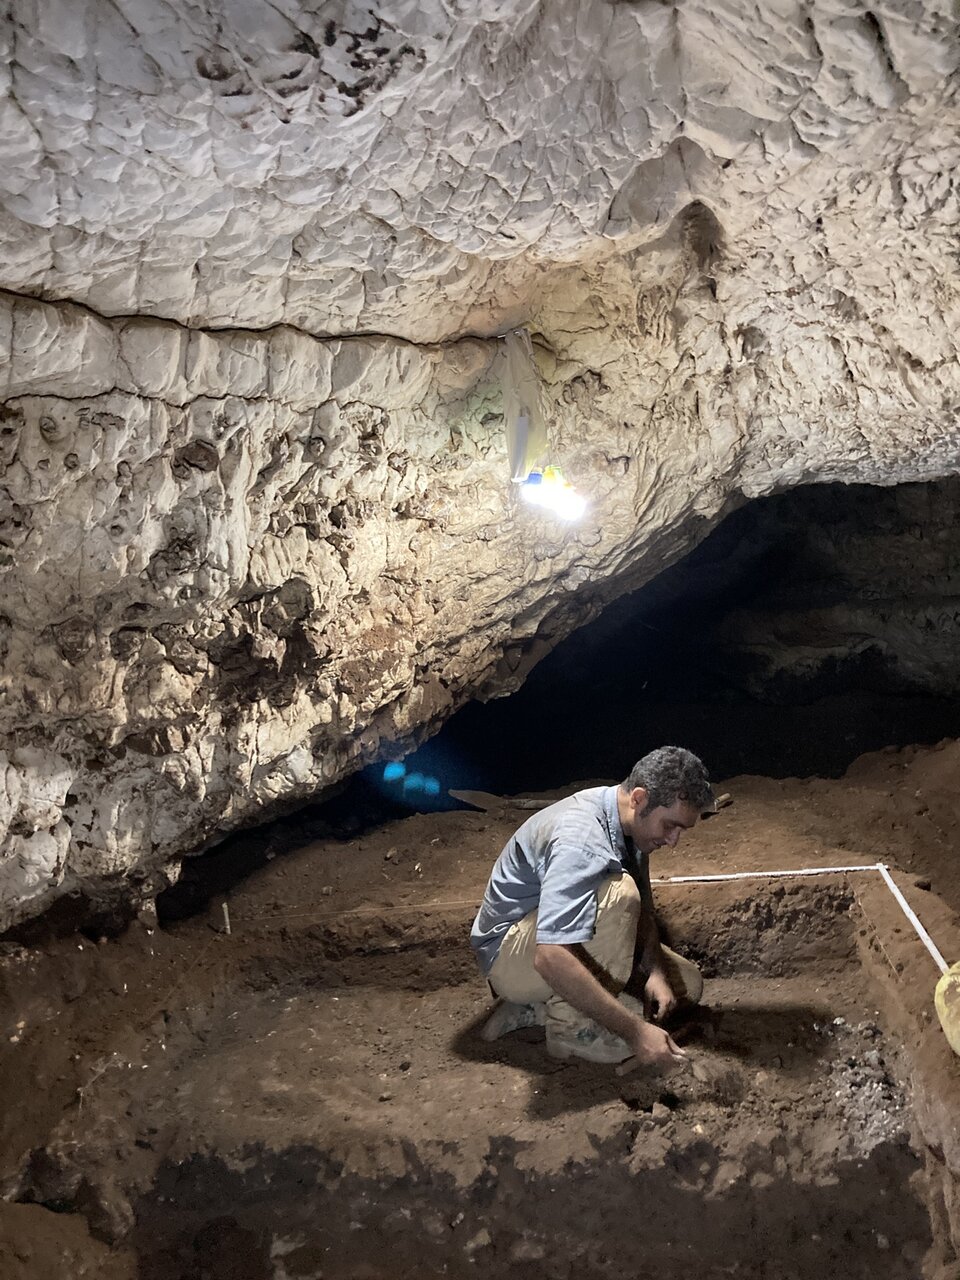 Paleolithic objects discovered in cave northern Iran